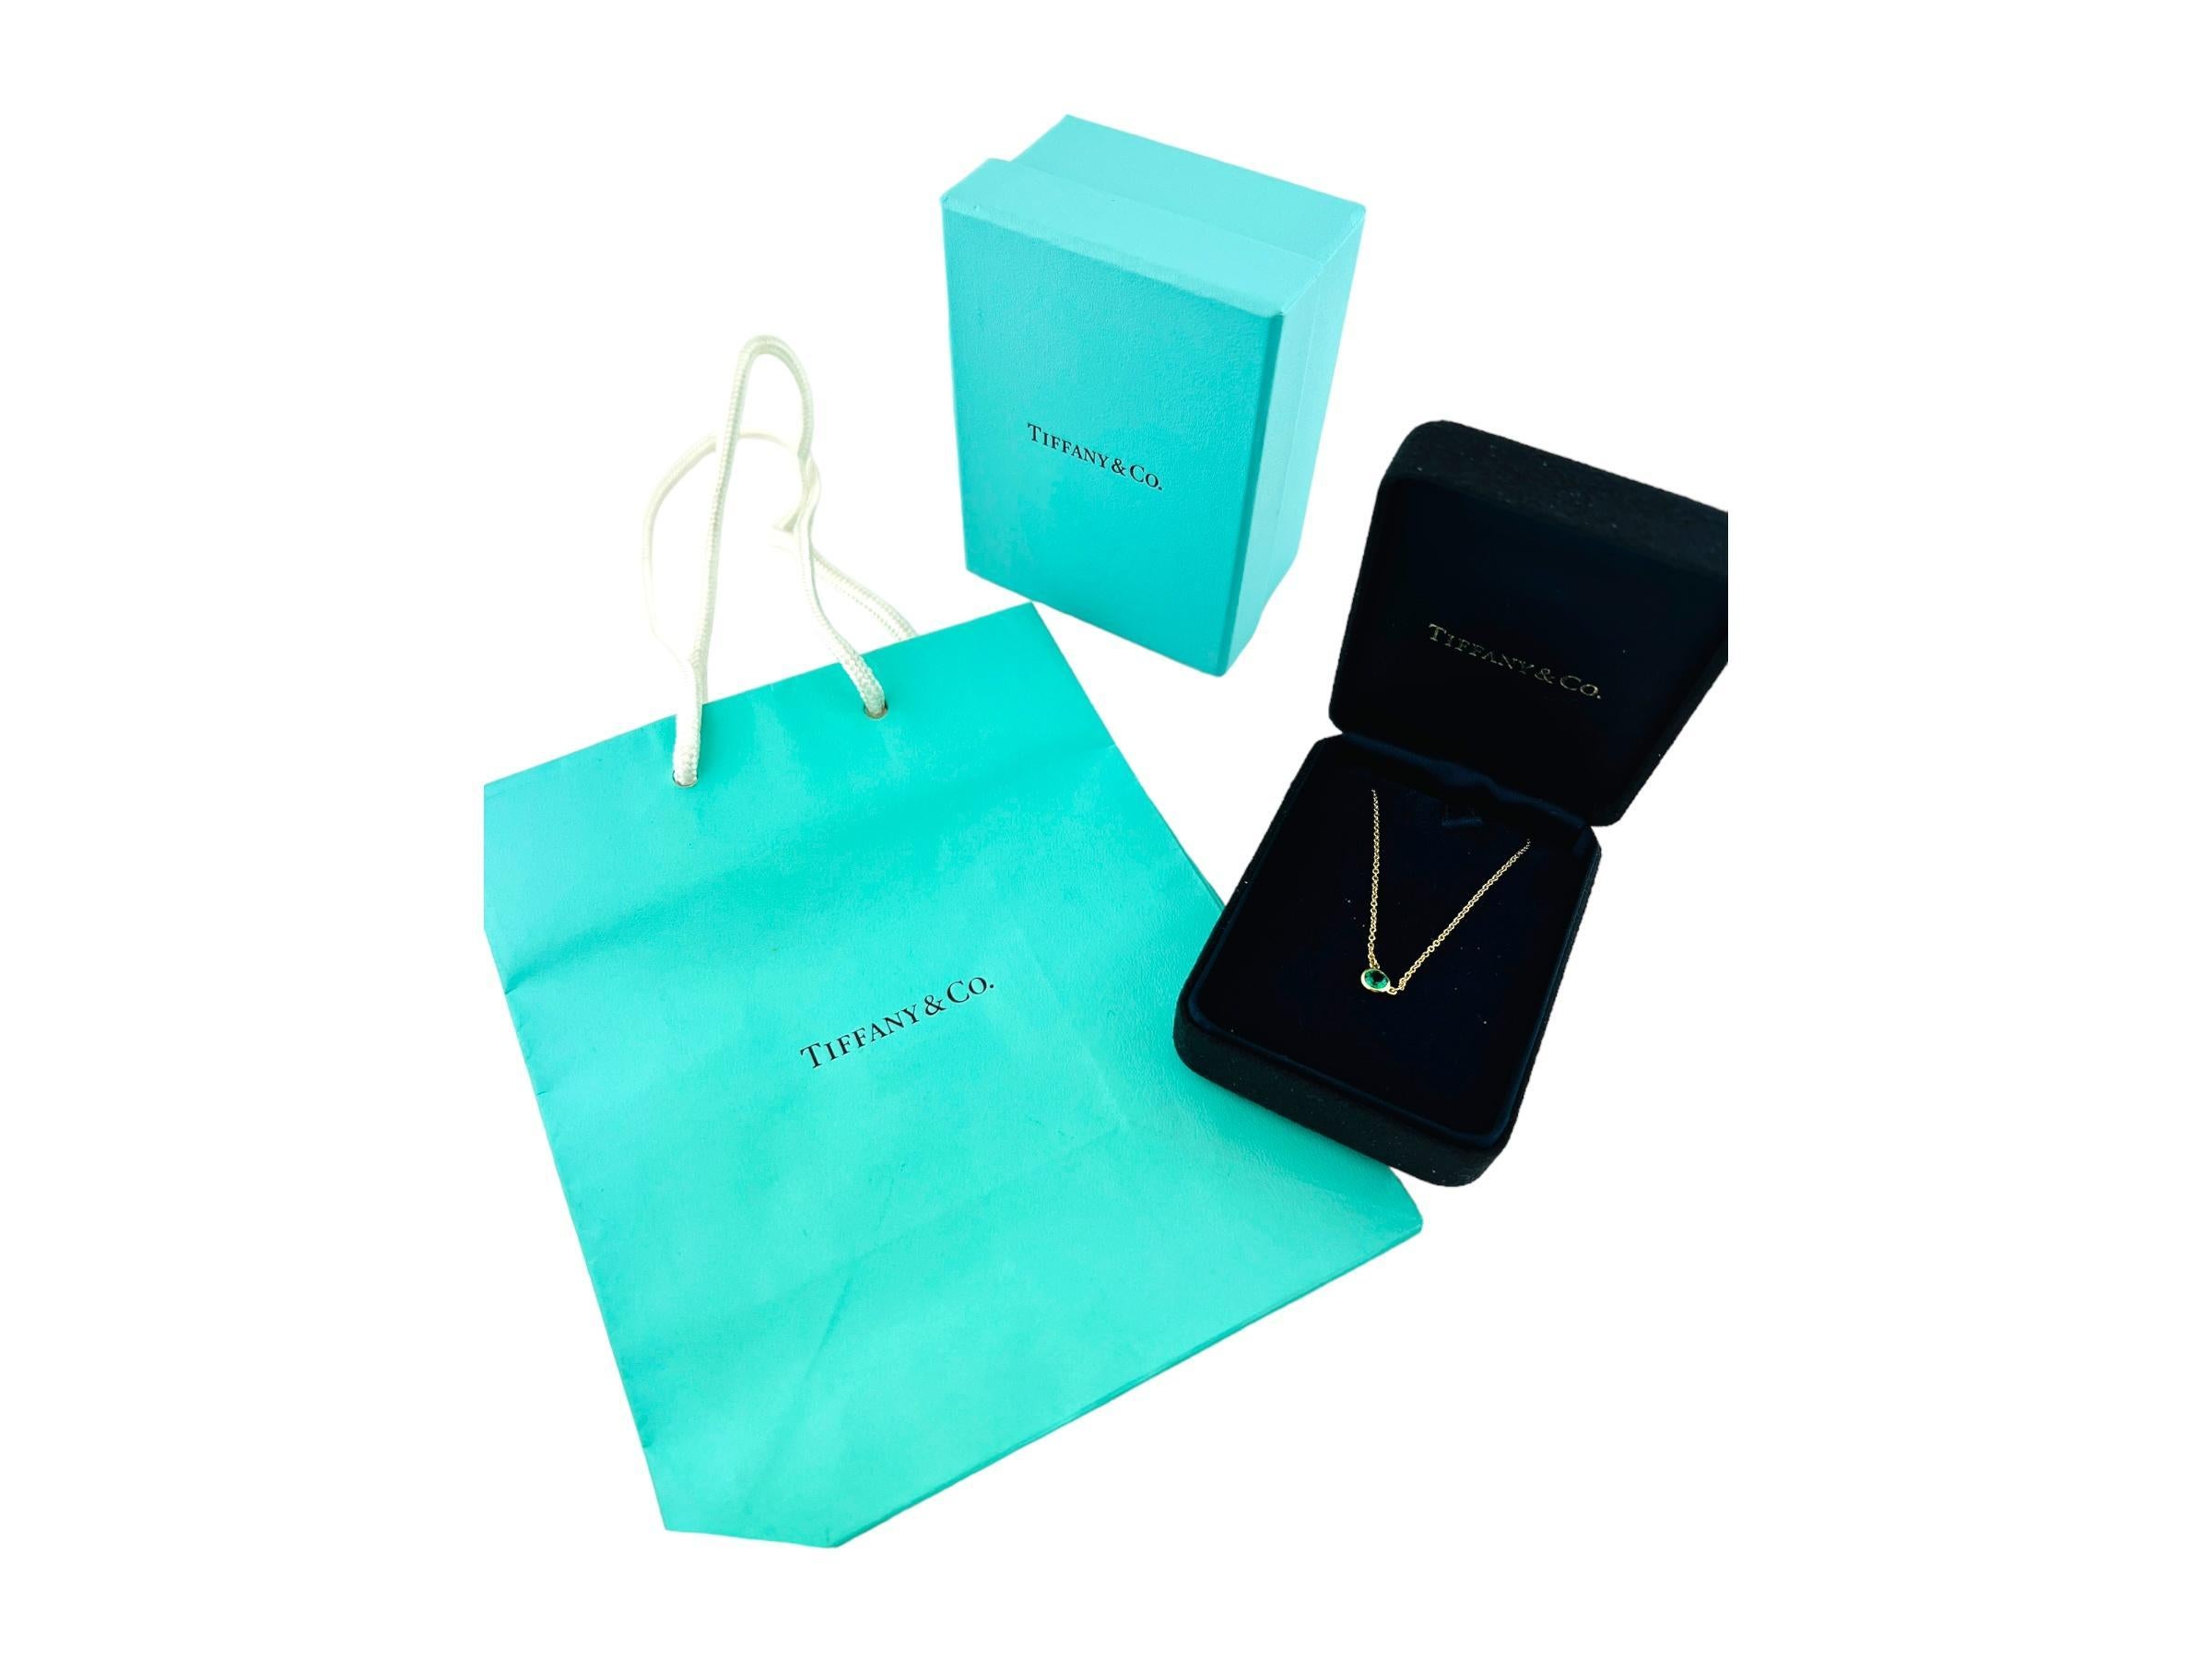 Tiffany & Co. Elsa Peretti 18K Yellow Gold Color by the Yard Emerald Necklace

This Emerald Pendant necklace was designed by Elsa Peretti  for the Tiffany Color by the Yard Collection.

The necklace is approx. 16